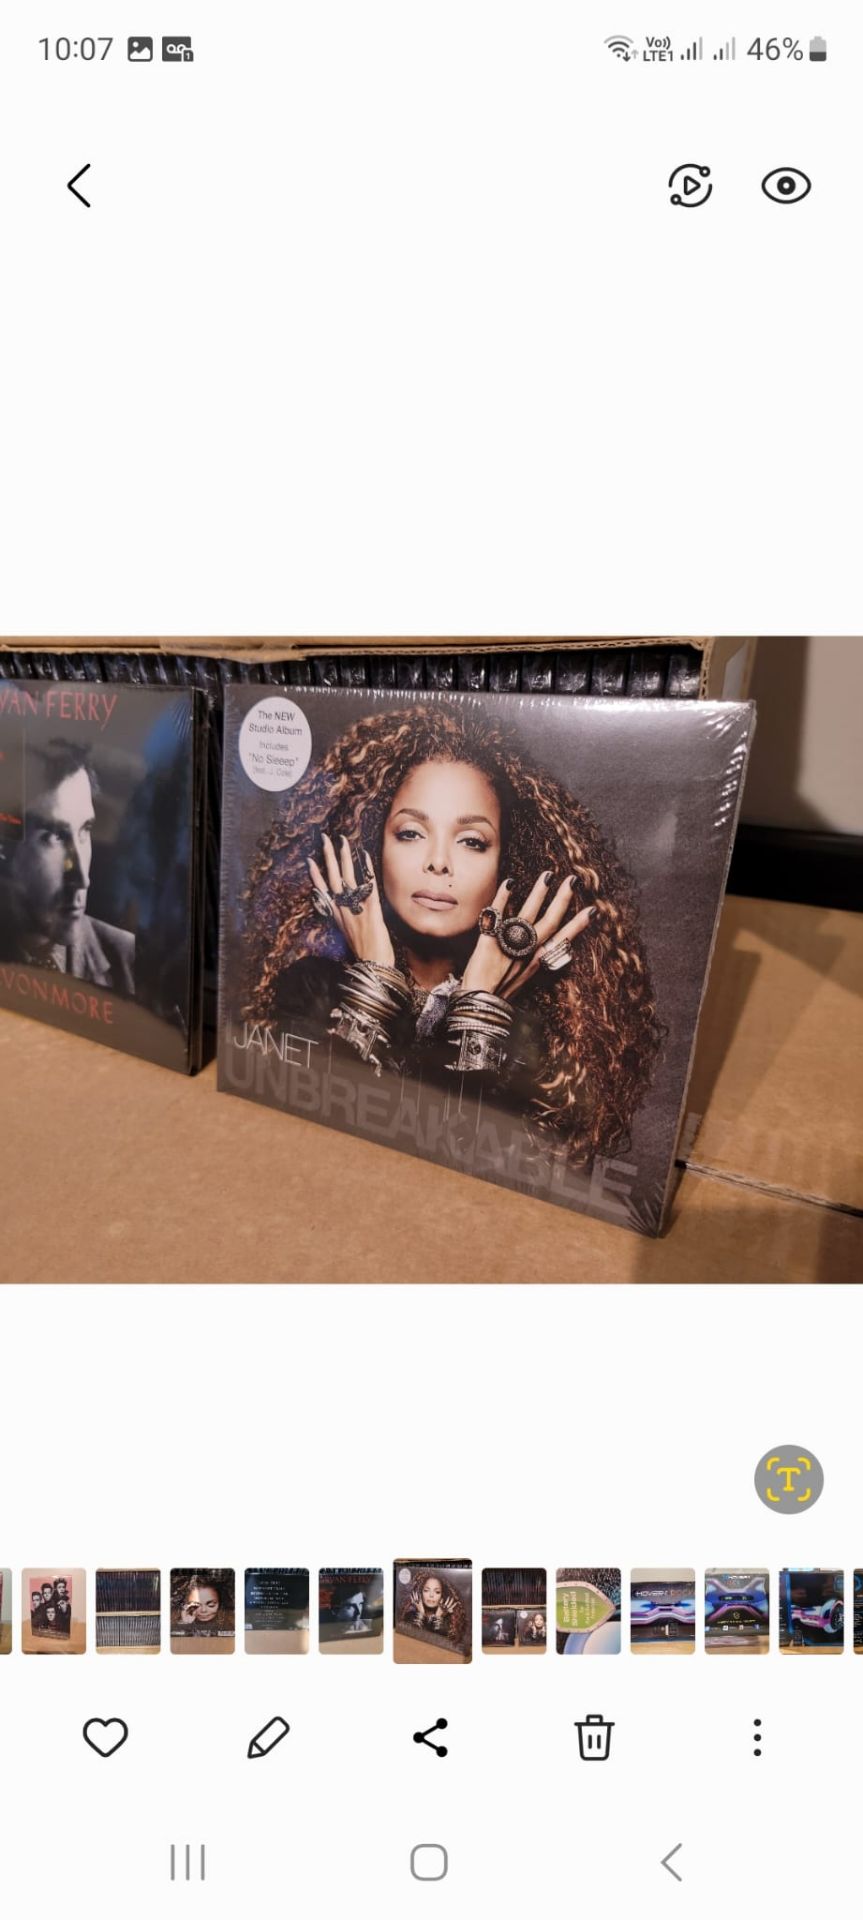 CD Janet Jackson and Brain Ferry x 6000 - Image 7 of 10